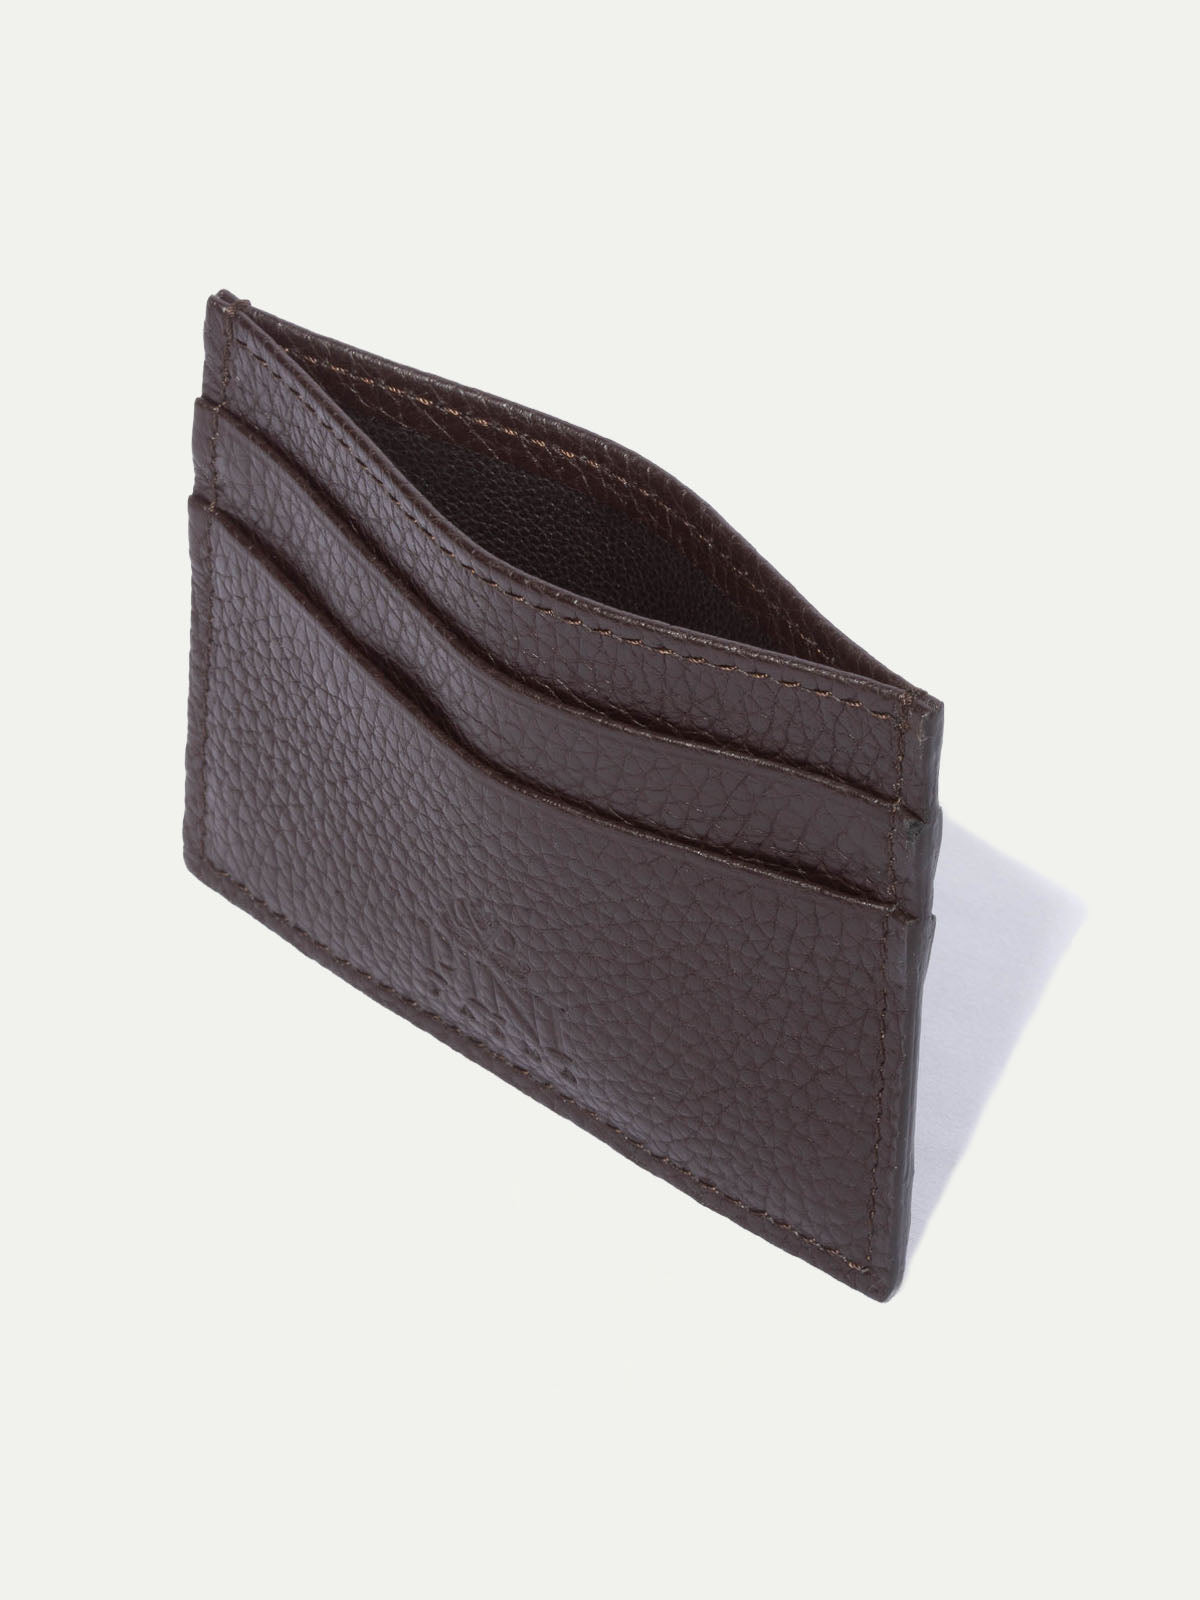 Brown leather card holder - Made in Italy